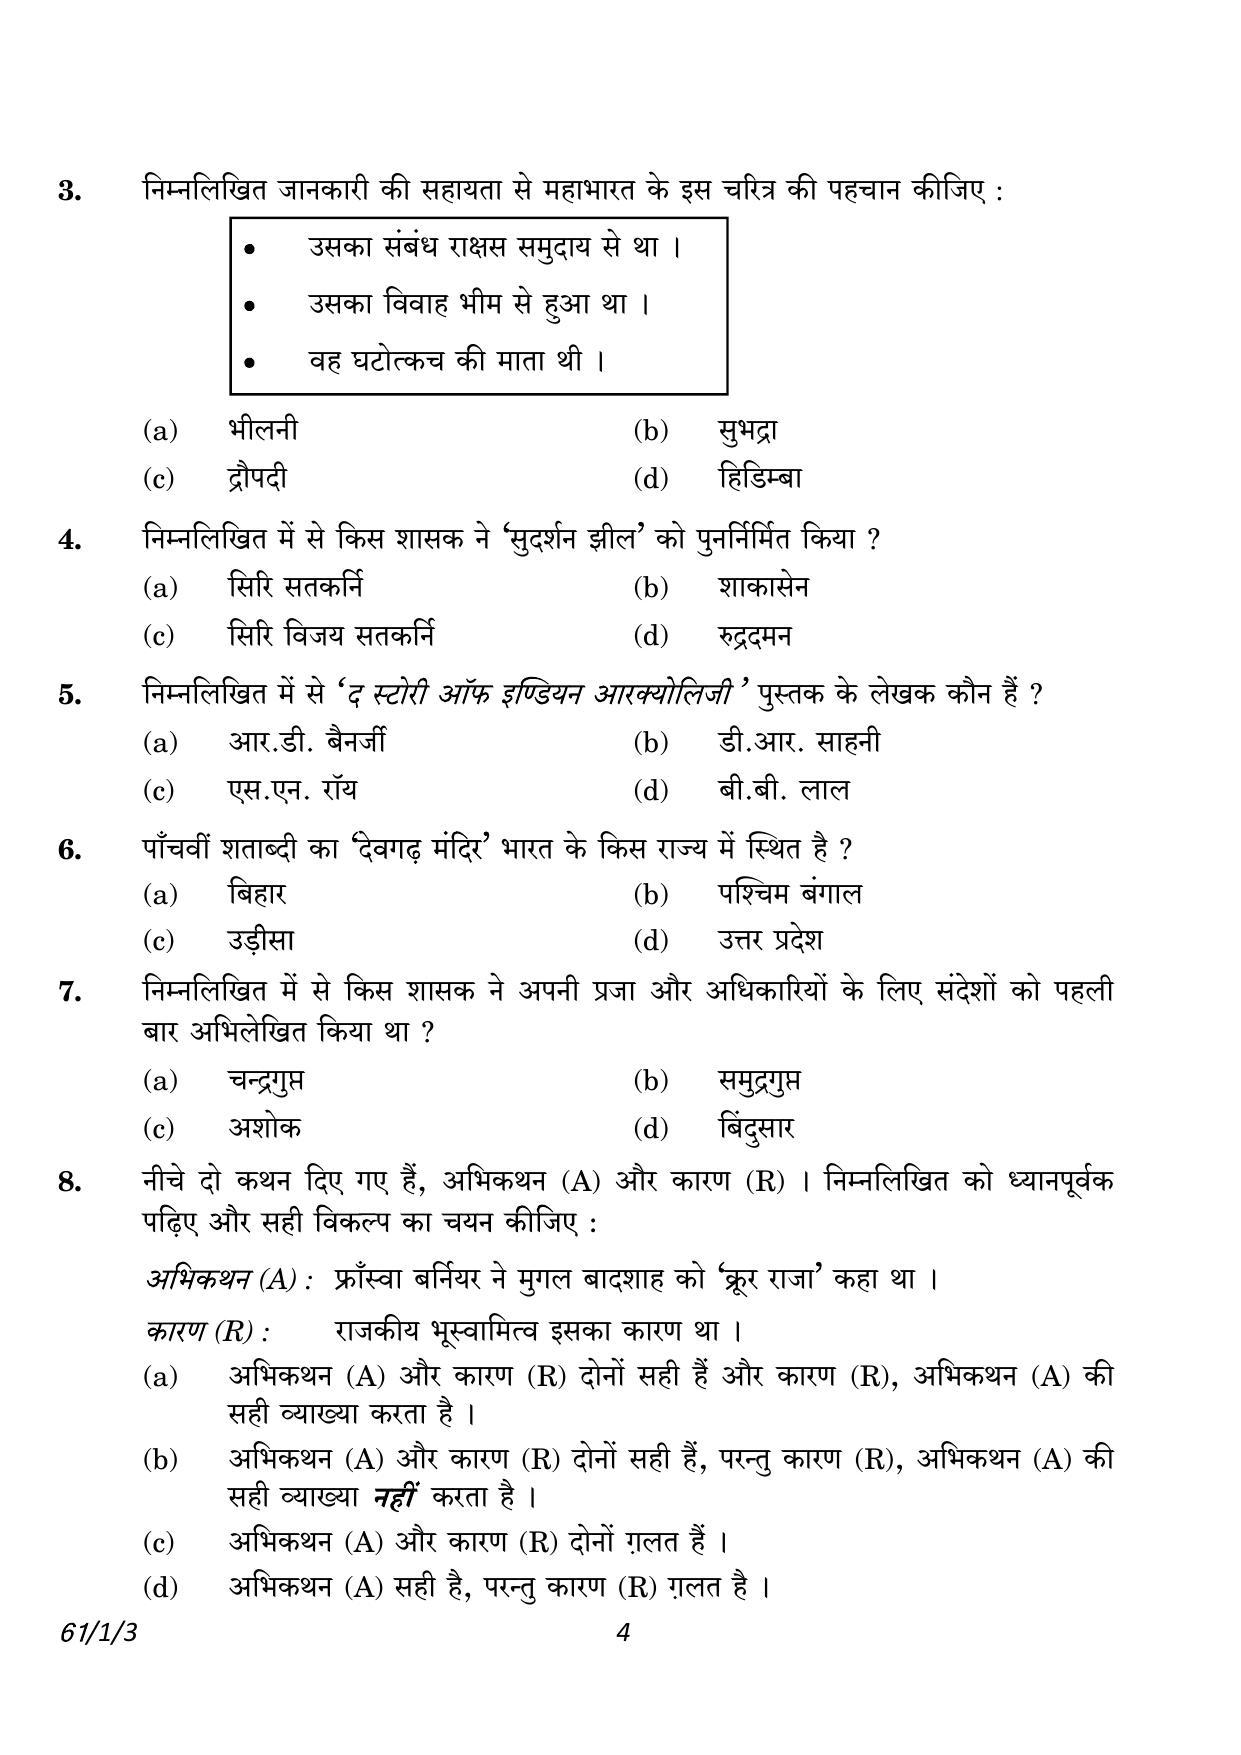 CBSE Class 12 61-1-3 History 2023 Question Paper - Page 4